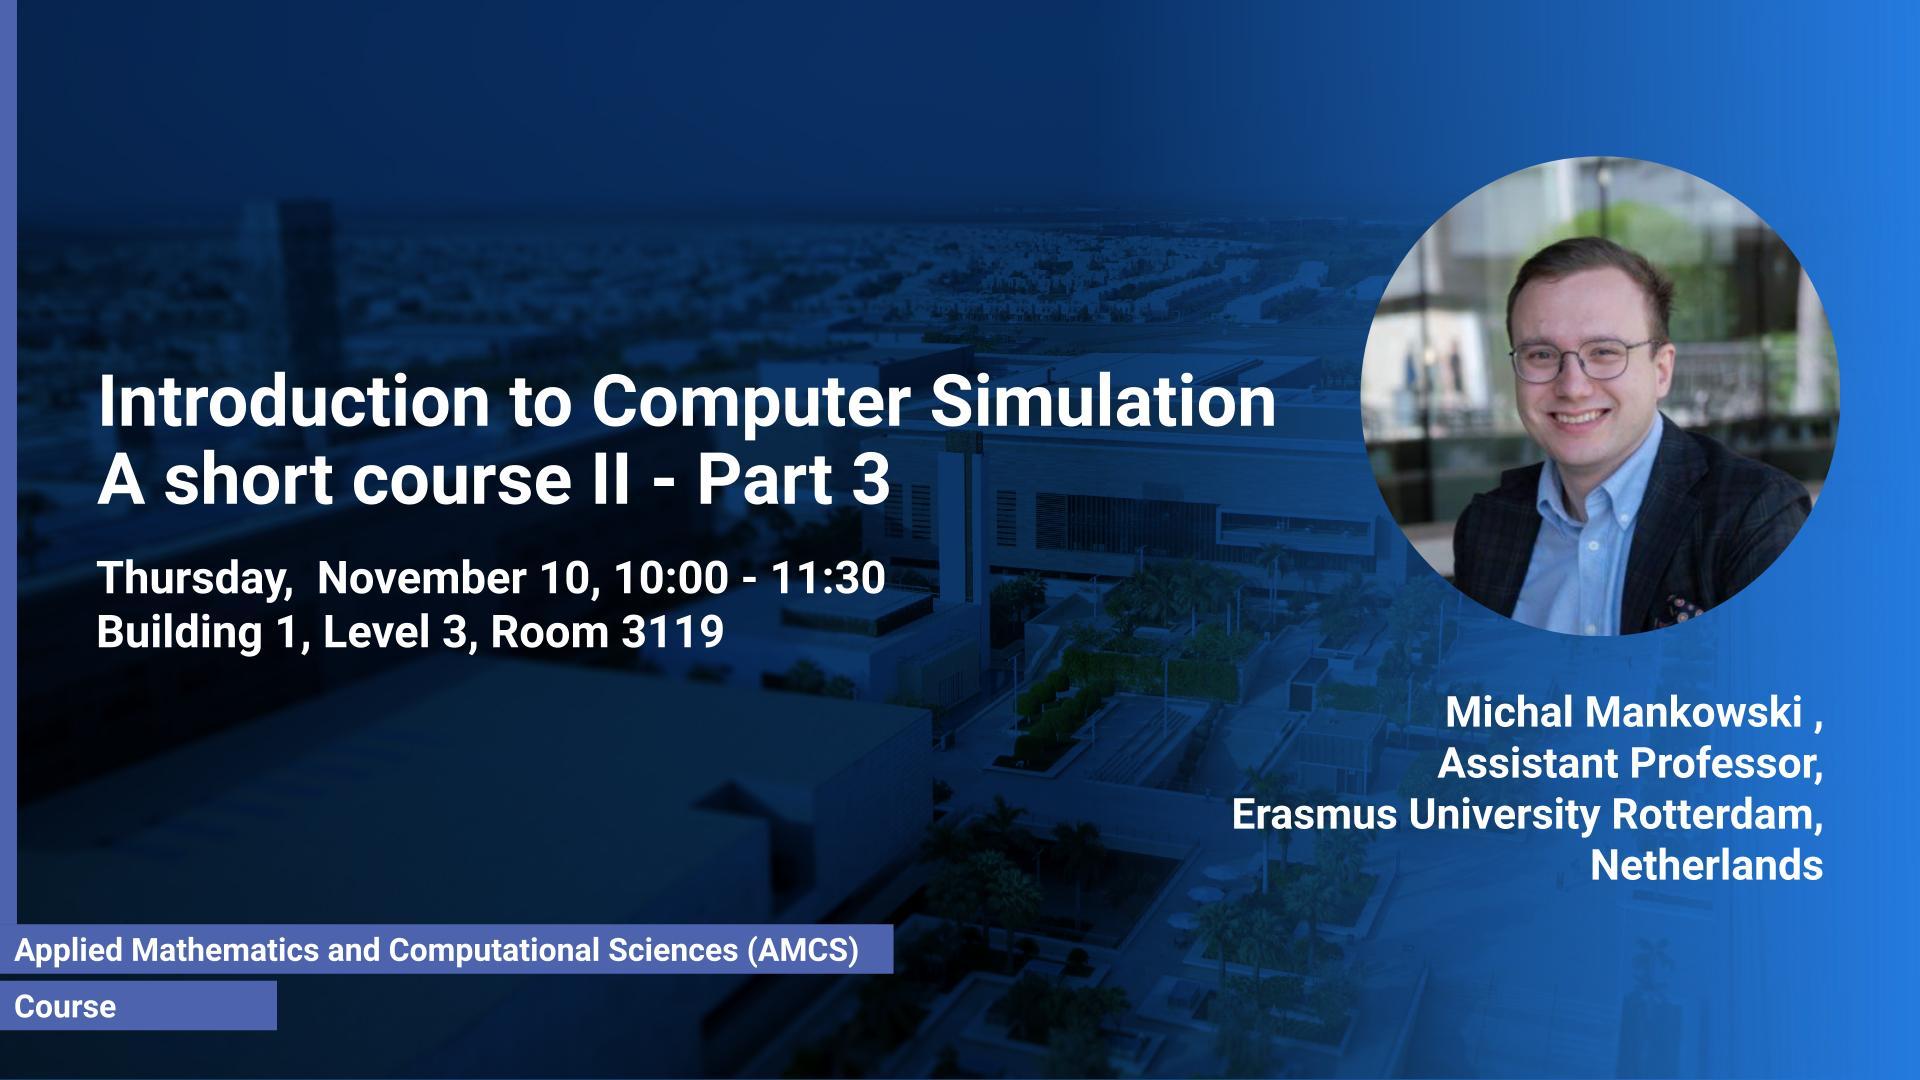 KAUST CEMSE AMCS Course Michal Mankowski  Introduction to Computer Simulation Part 3